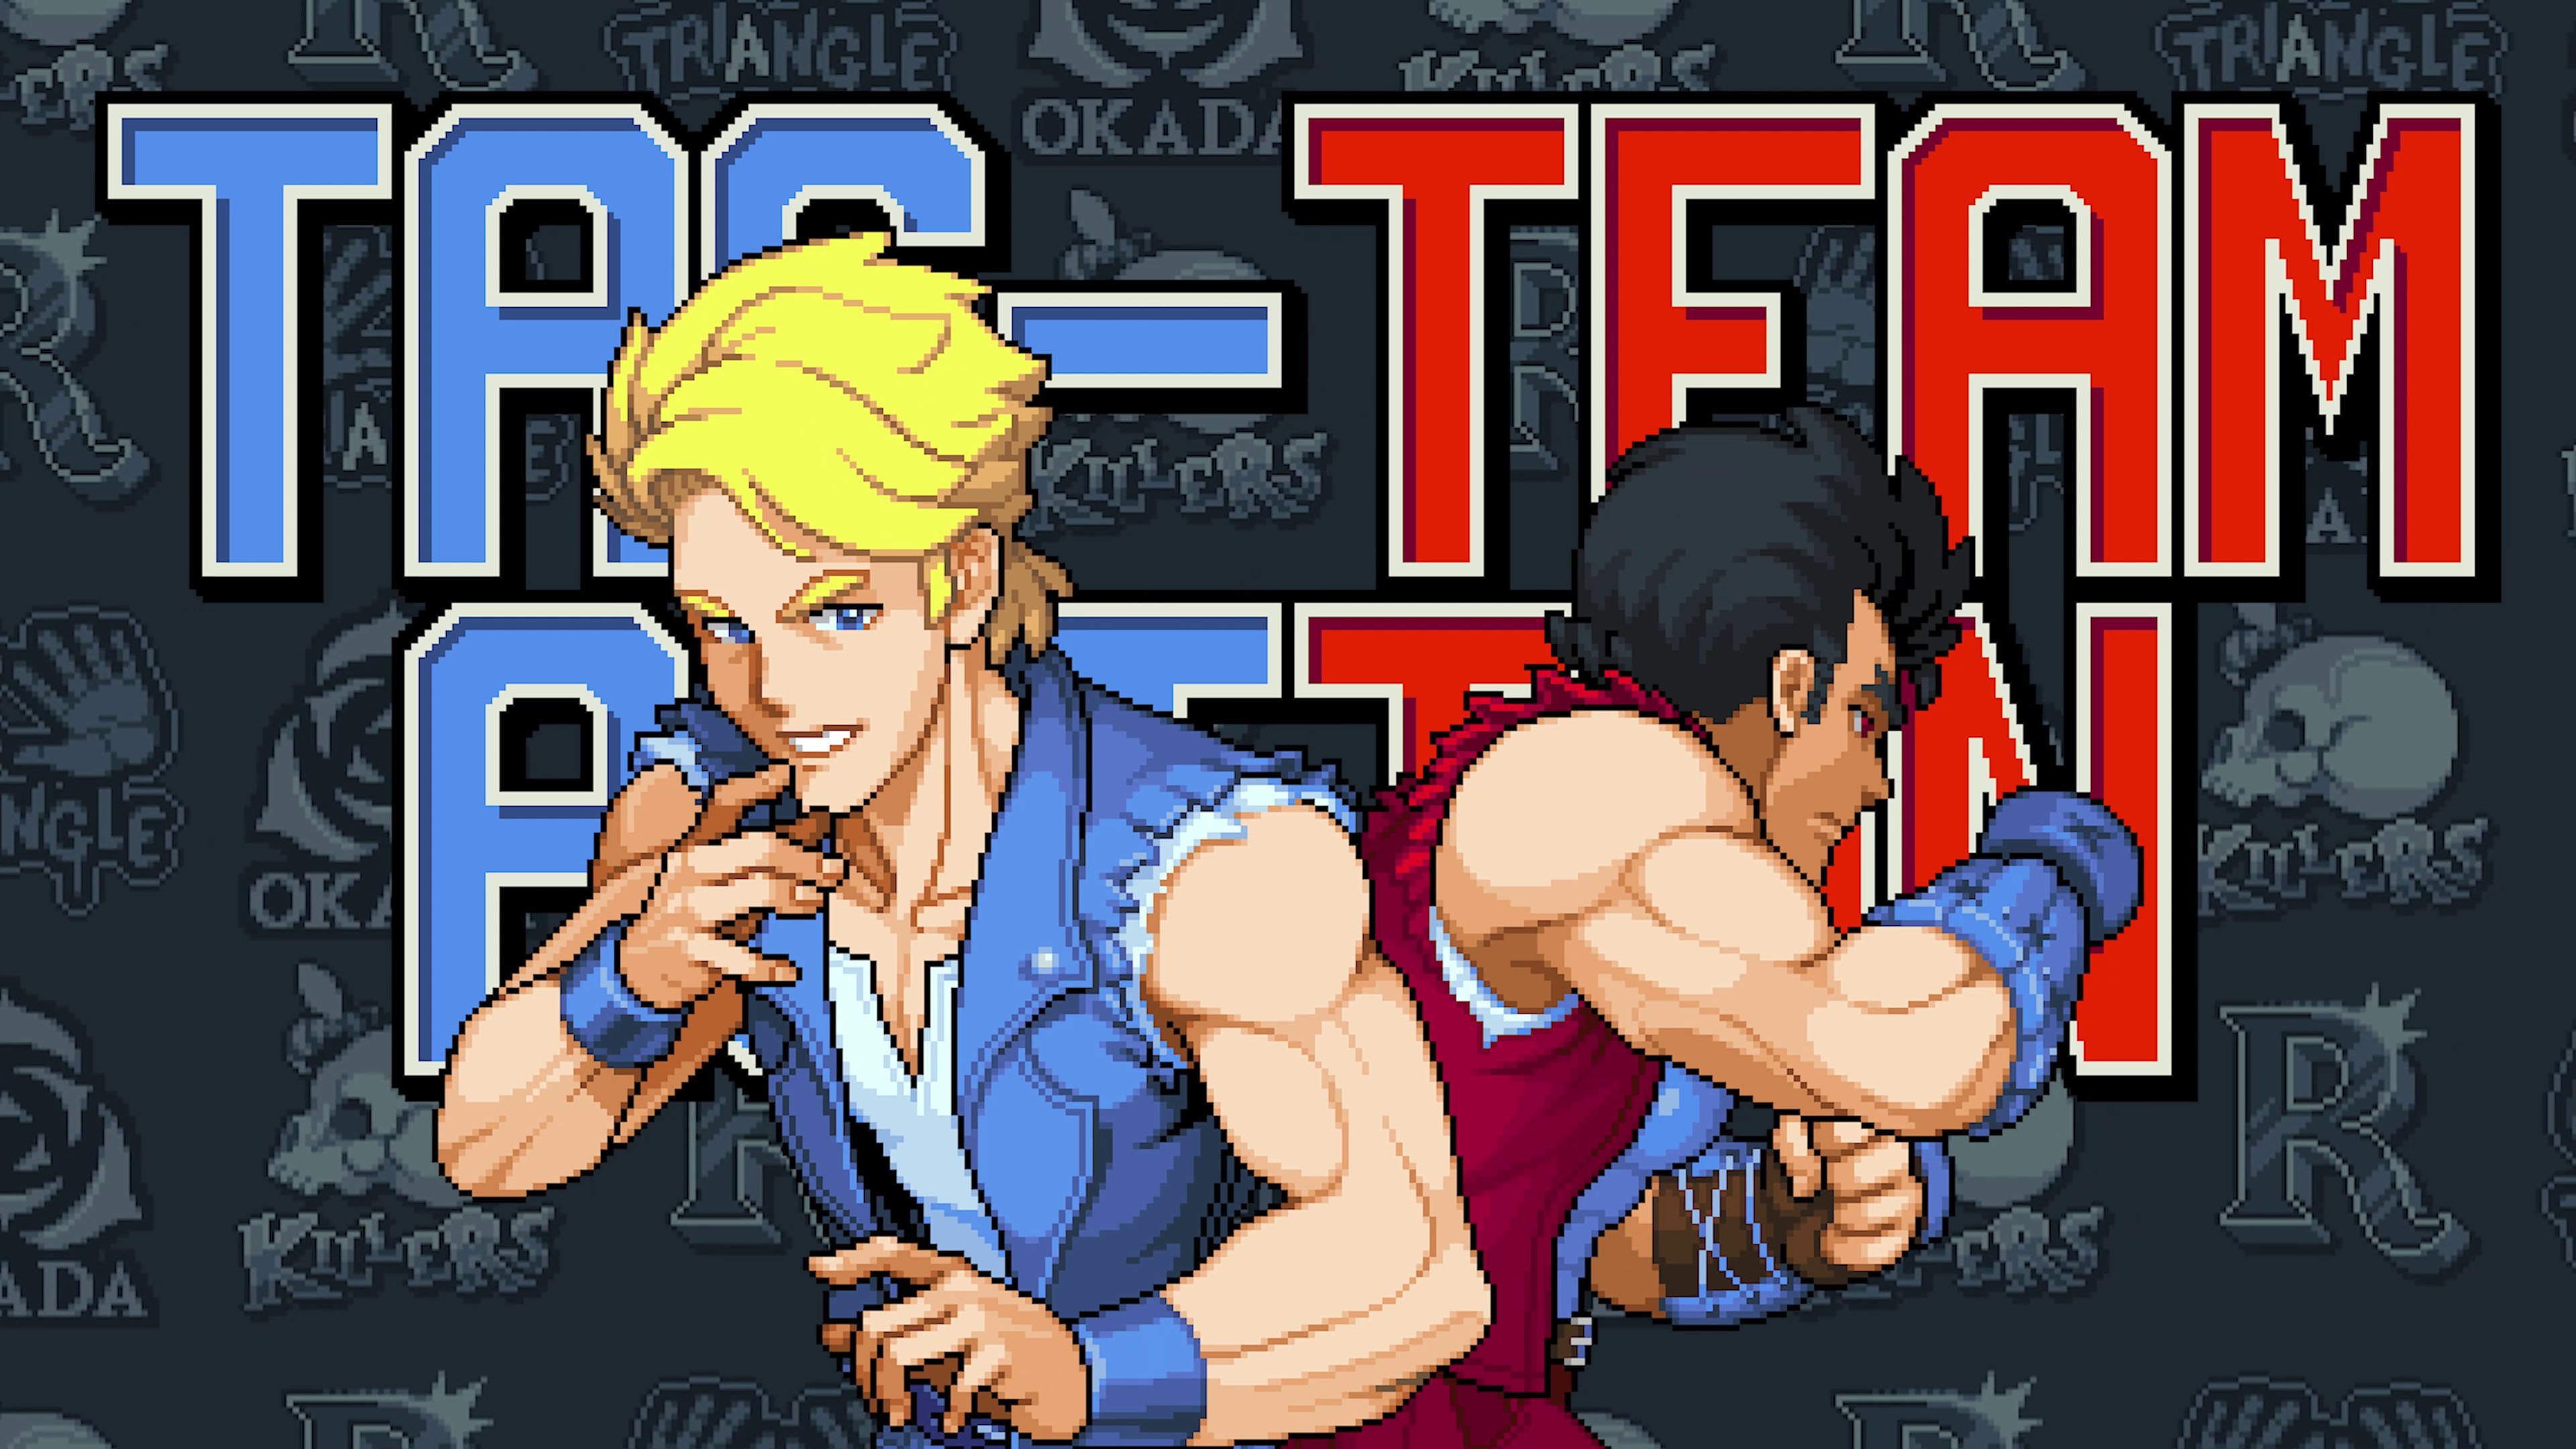 Double Dragon Gaiden: Rise of the Dragons characters trailer